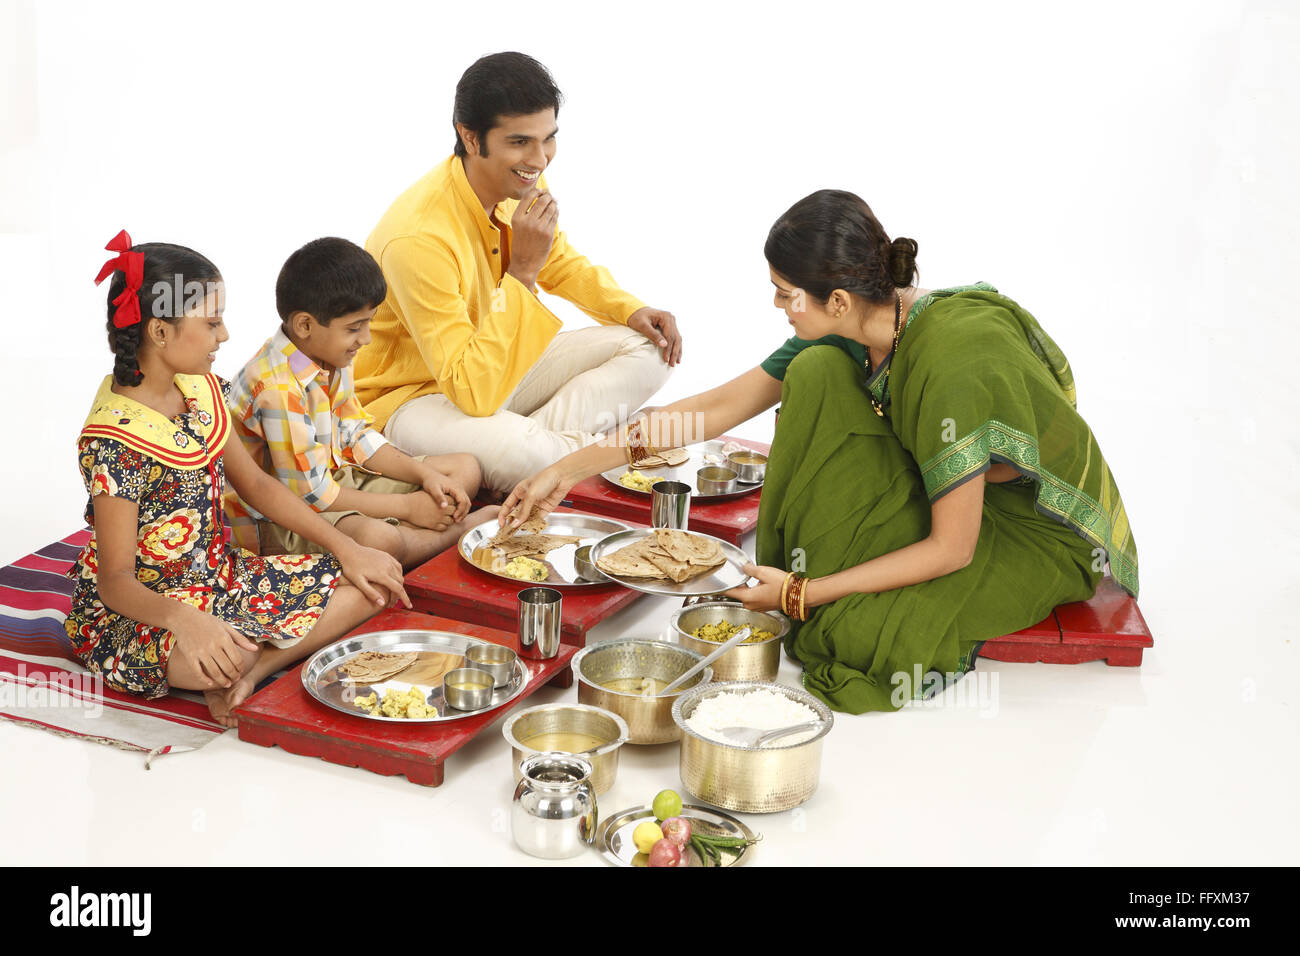 ang 209231 - Indian family Father children eating lunch and mother serving - Model Releases # 743A and 743B and 743C and 743D Stock Photo